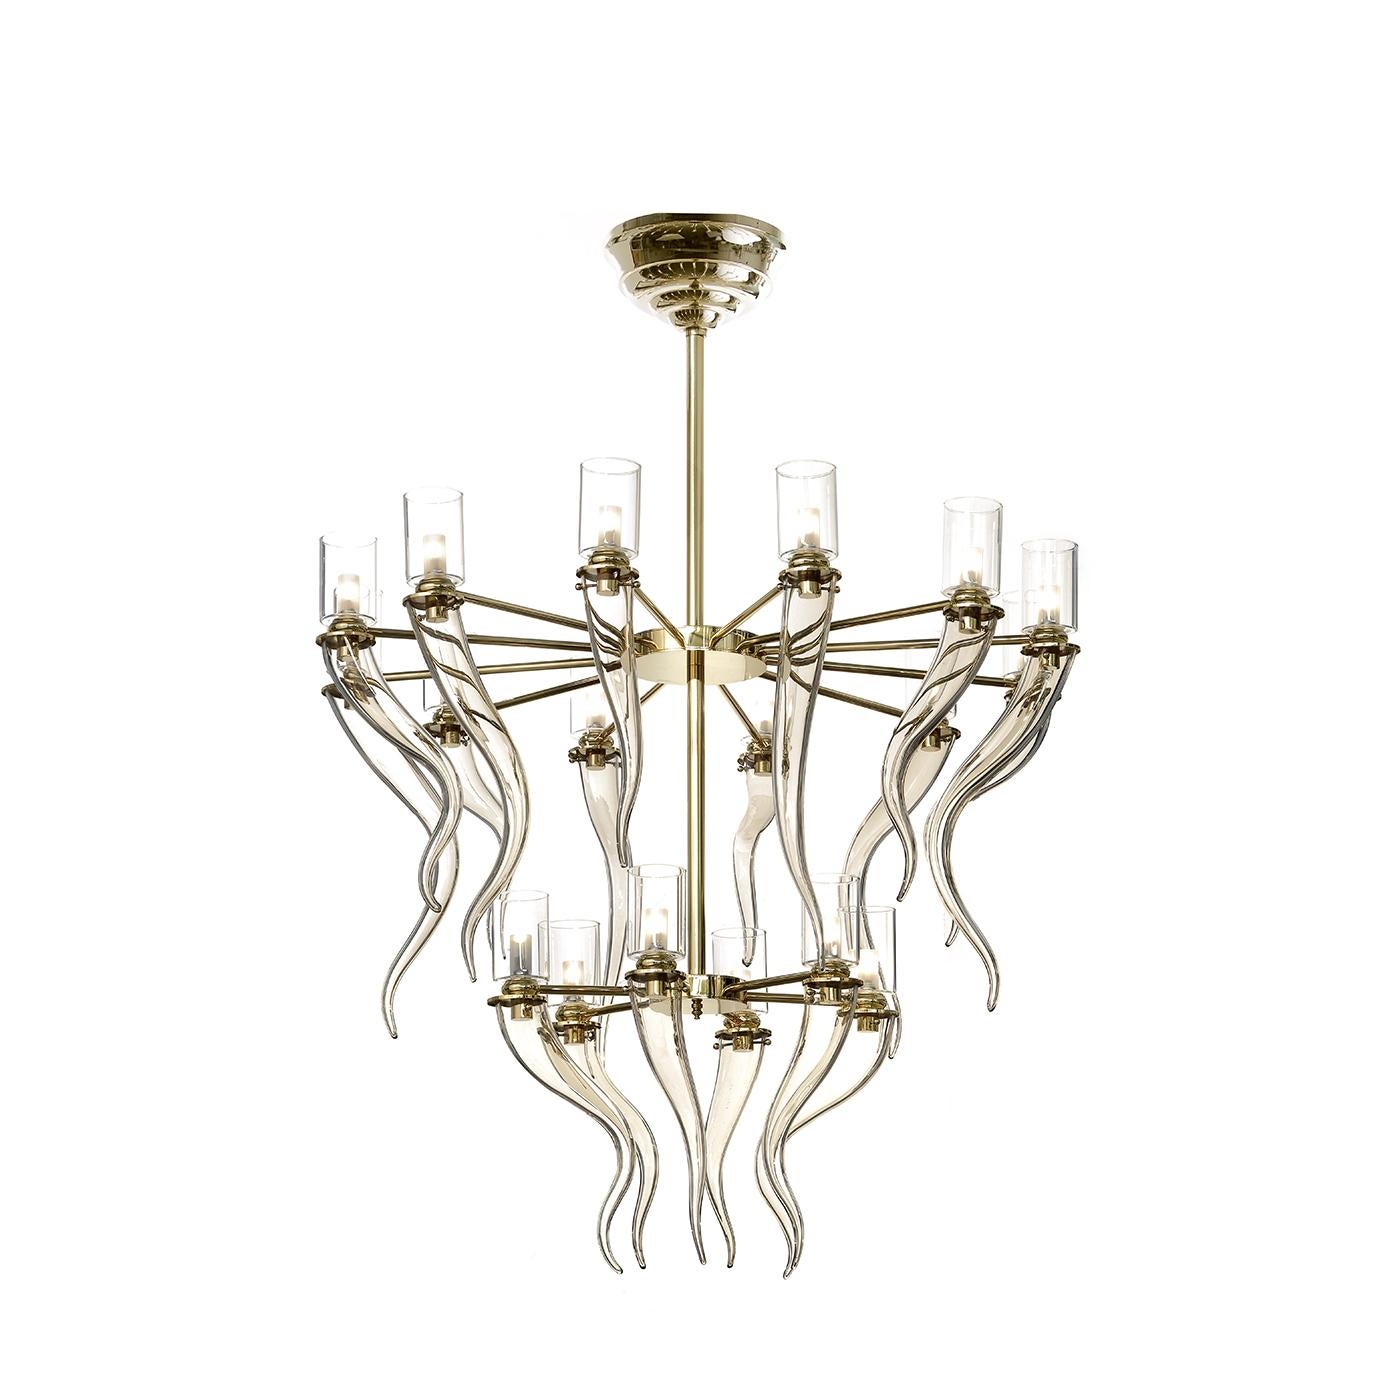 This exquisite chandelier was made of mouth-blown Venetian glass shaped in a series of horn-like elements in a delicate honey color. These pieces are tiered in two layers, one layer with twelve, the other with six - to create dramatic depth.